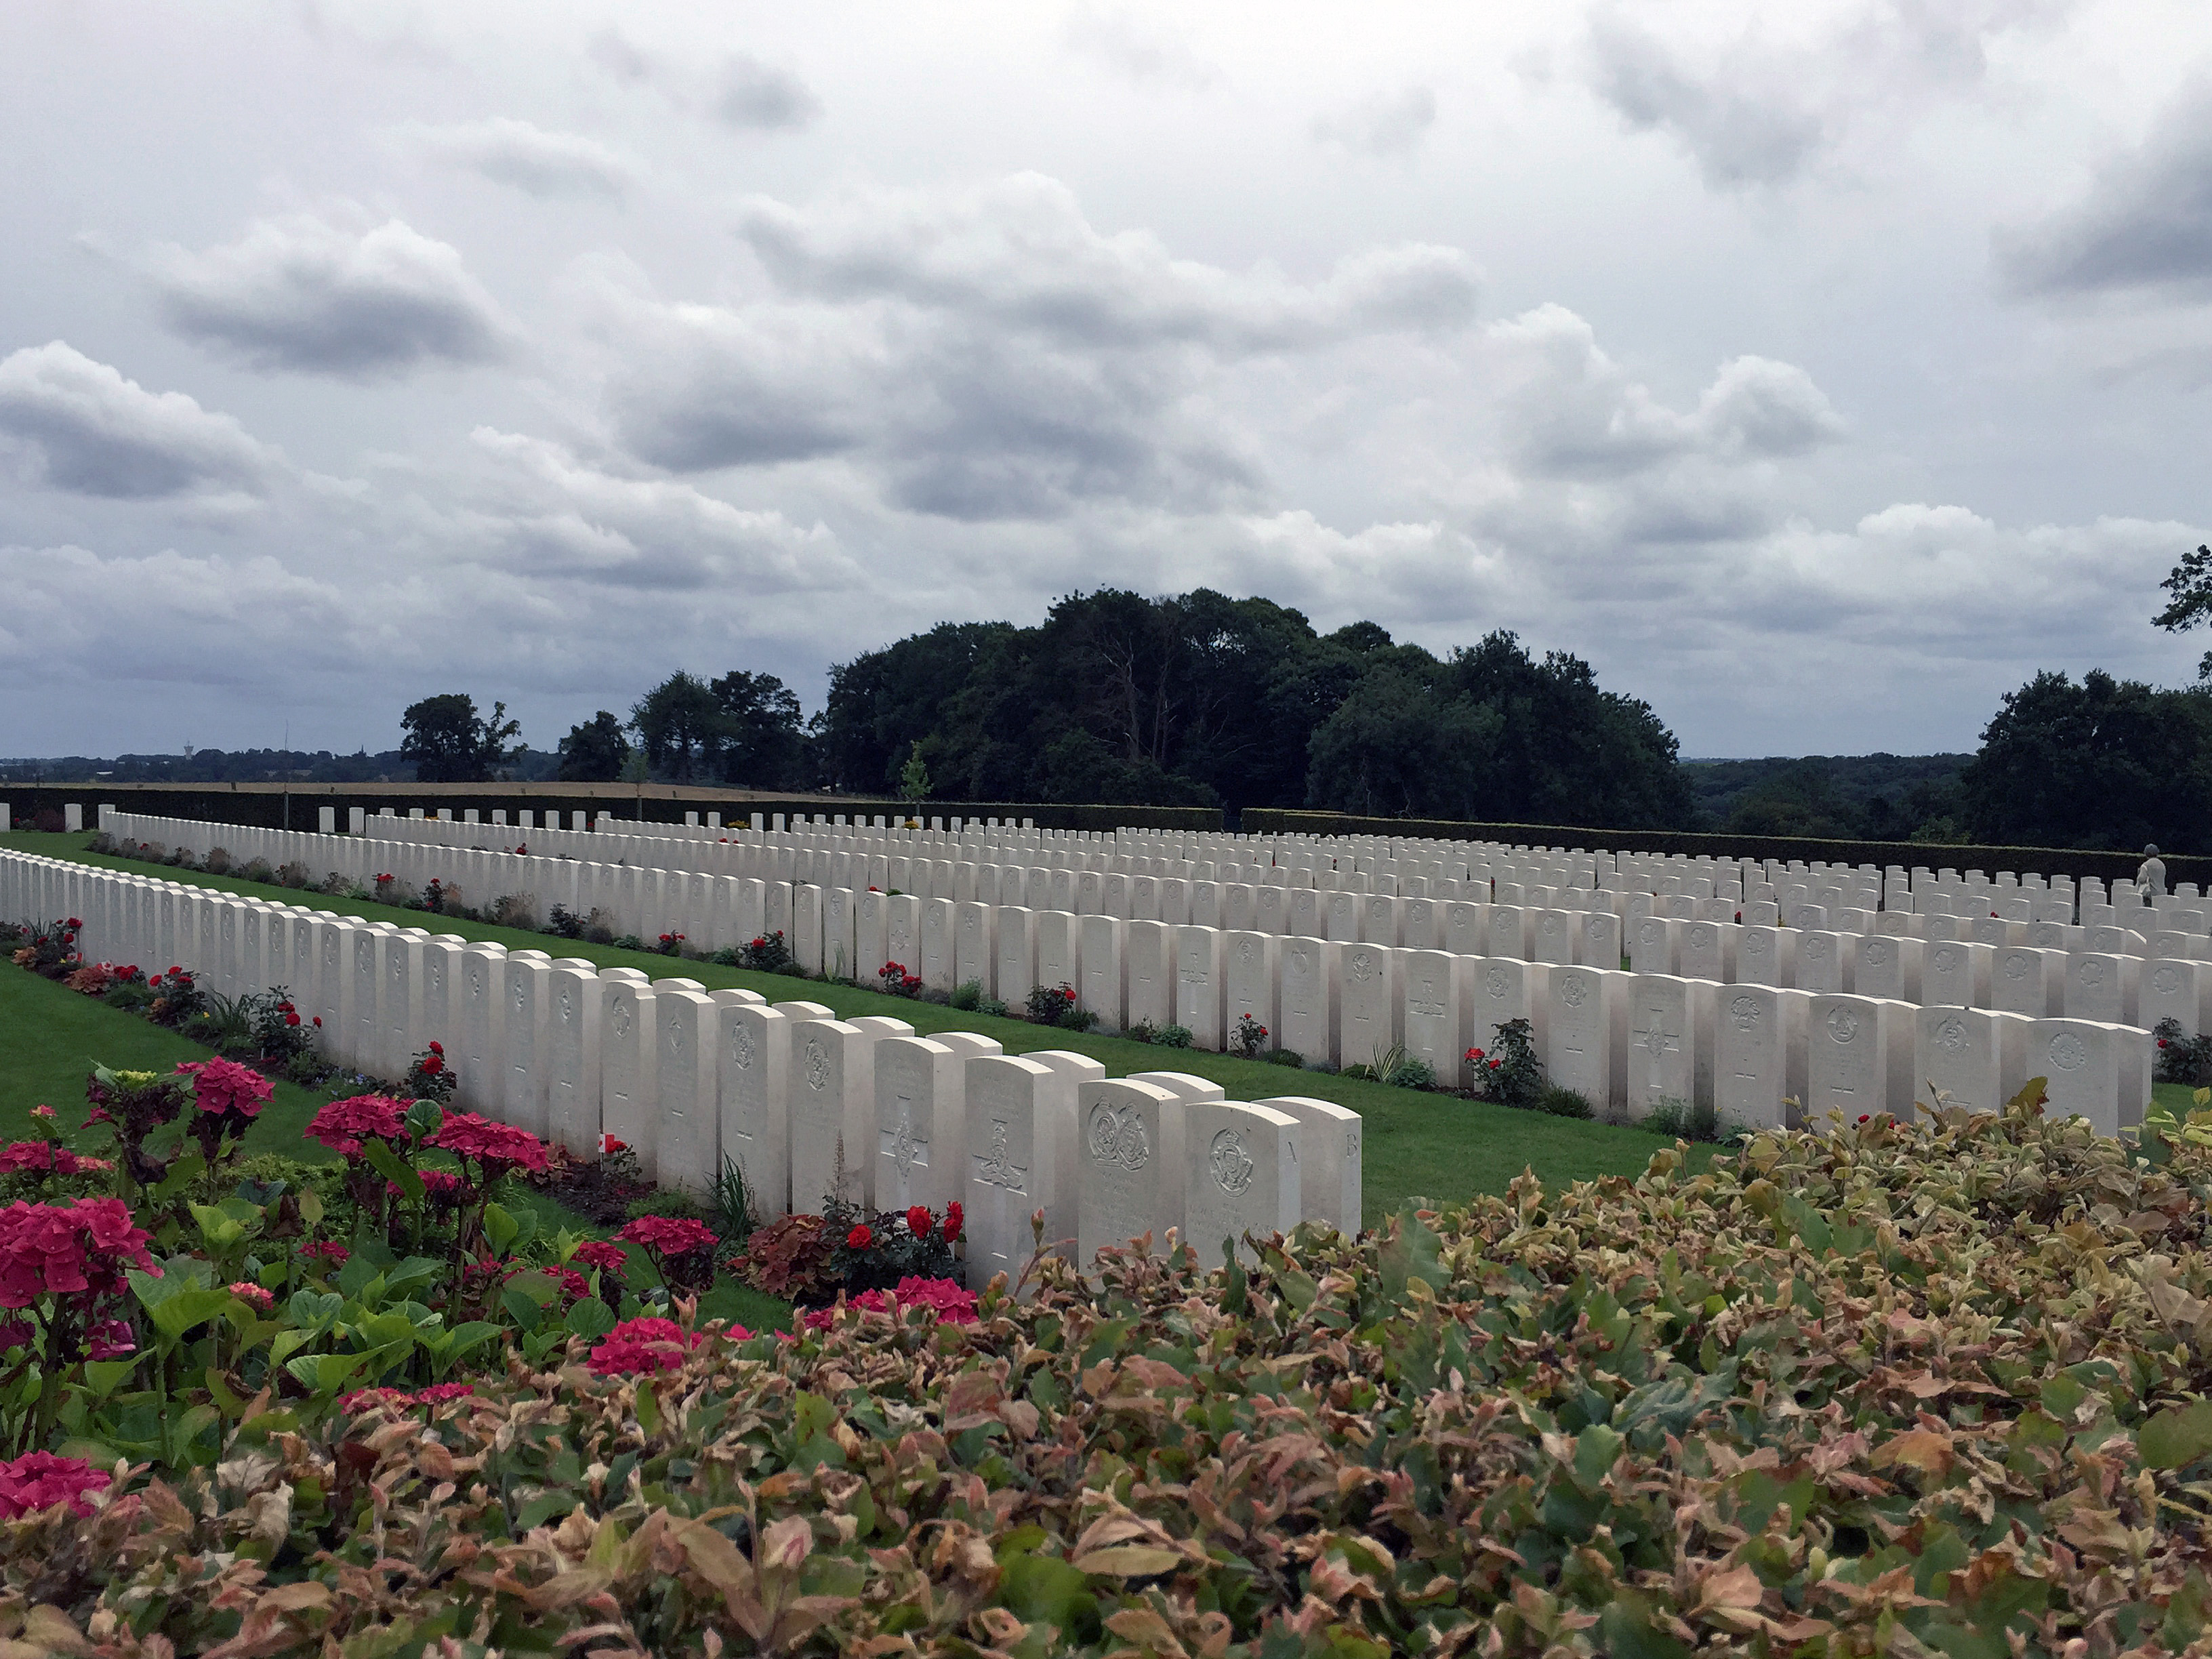 The Canadian War Cemetery in Dieppe.